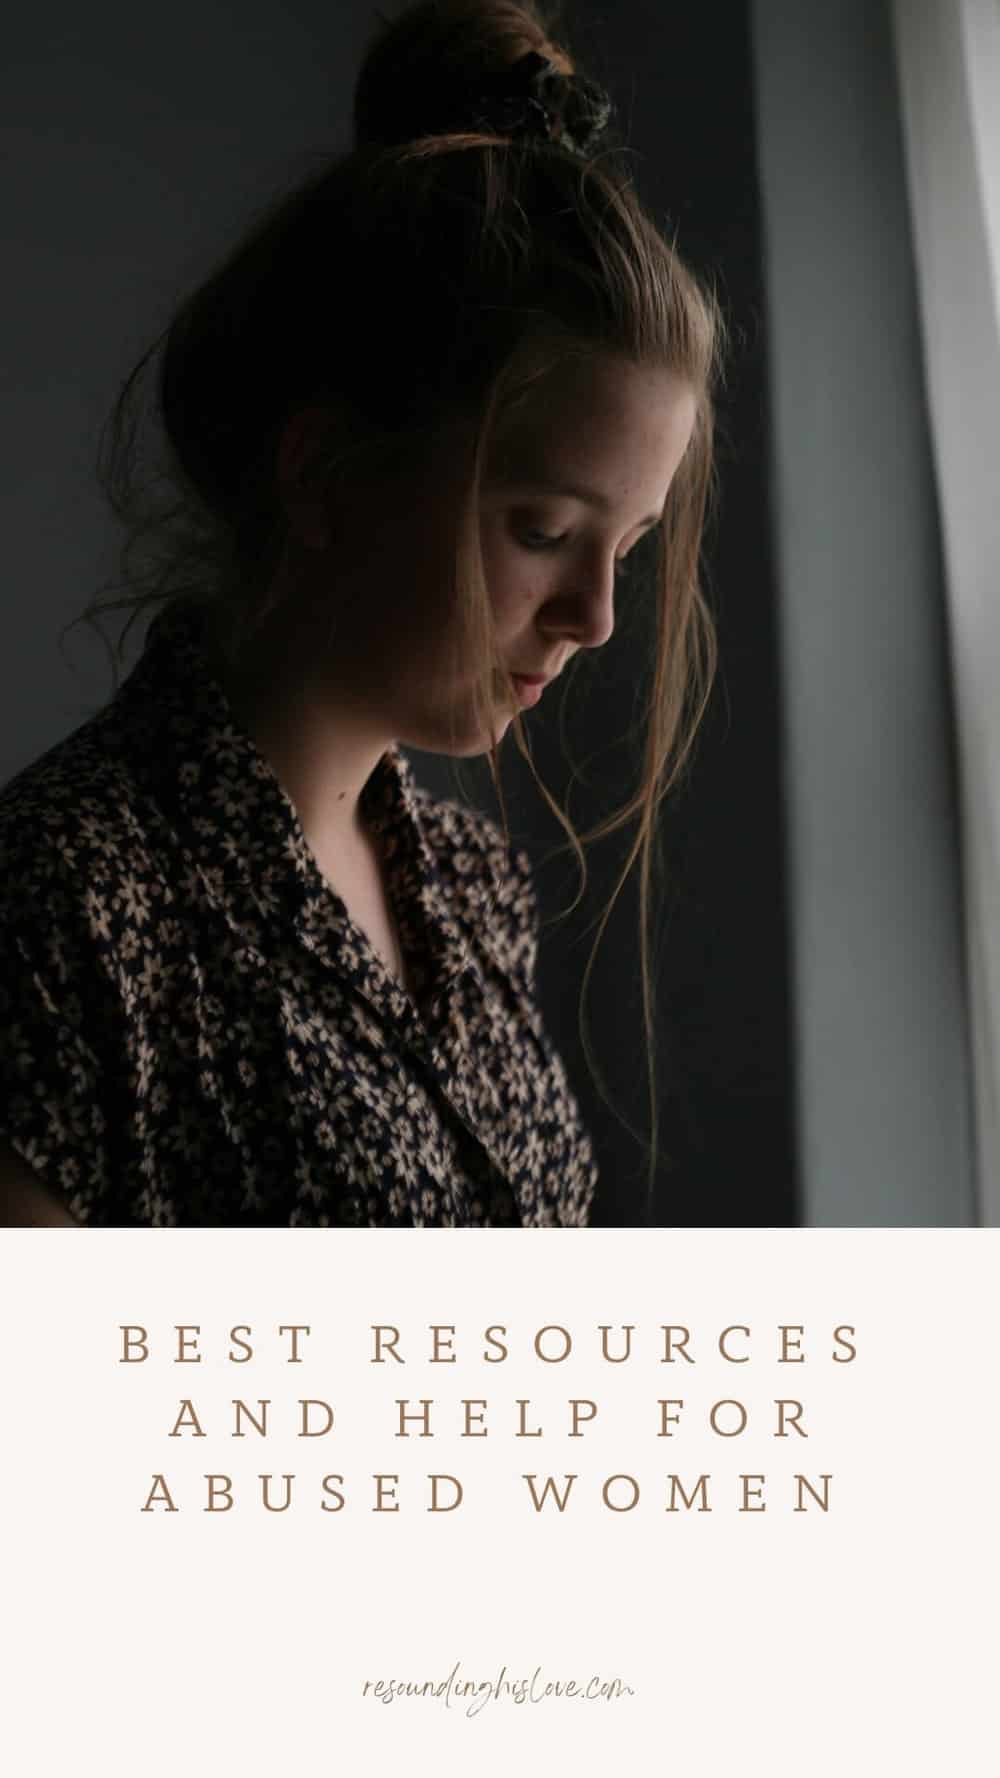 a woman with her head down and sad with text Best Resources and Help for Abused Women